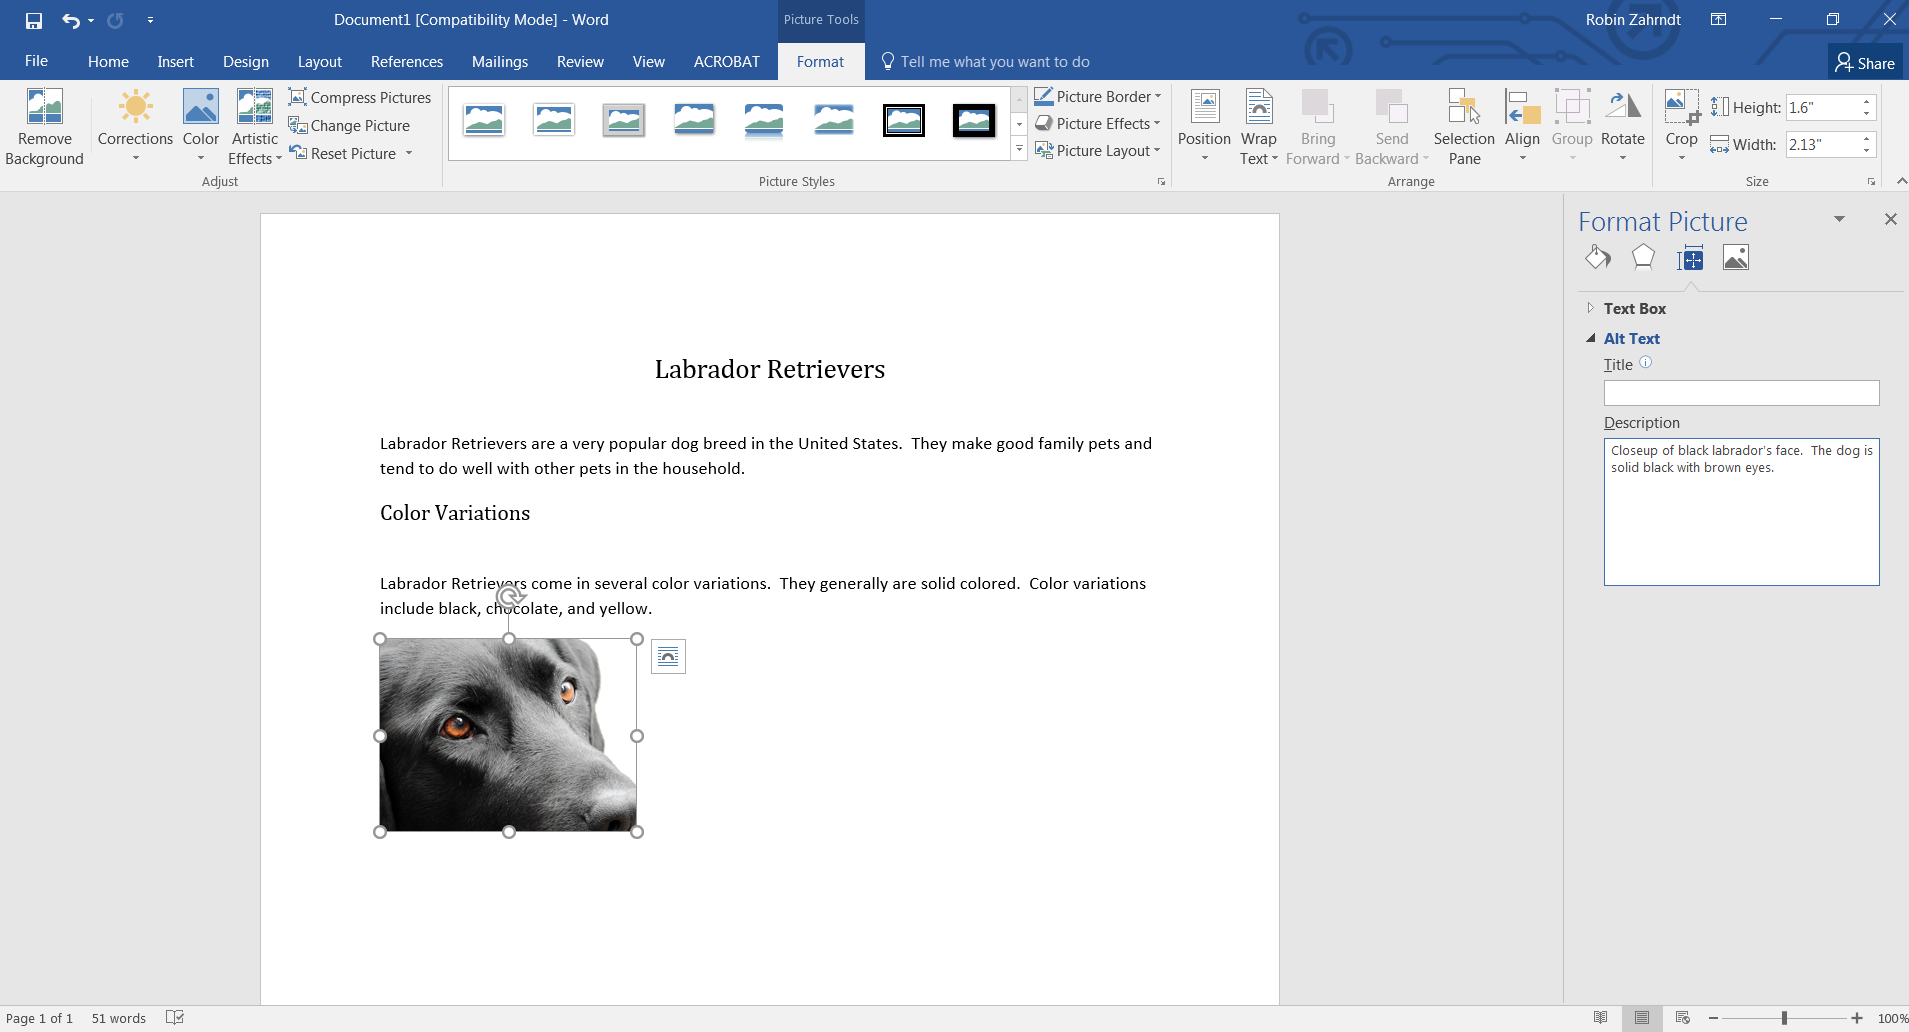 Screenshot of a Microsft Word document about Labrador Retrievers. In the document, the author has written alternative text for an image of a Labrador Retriever.